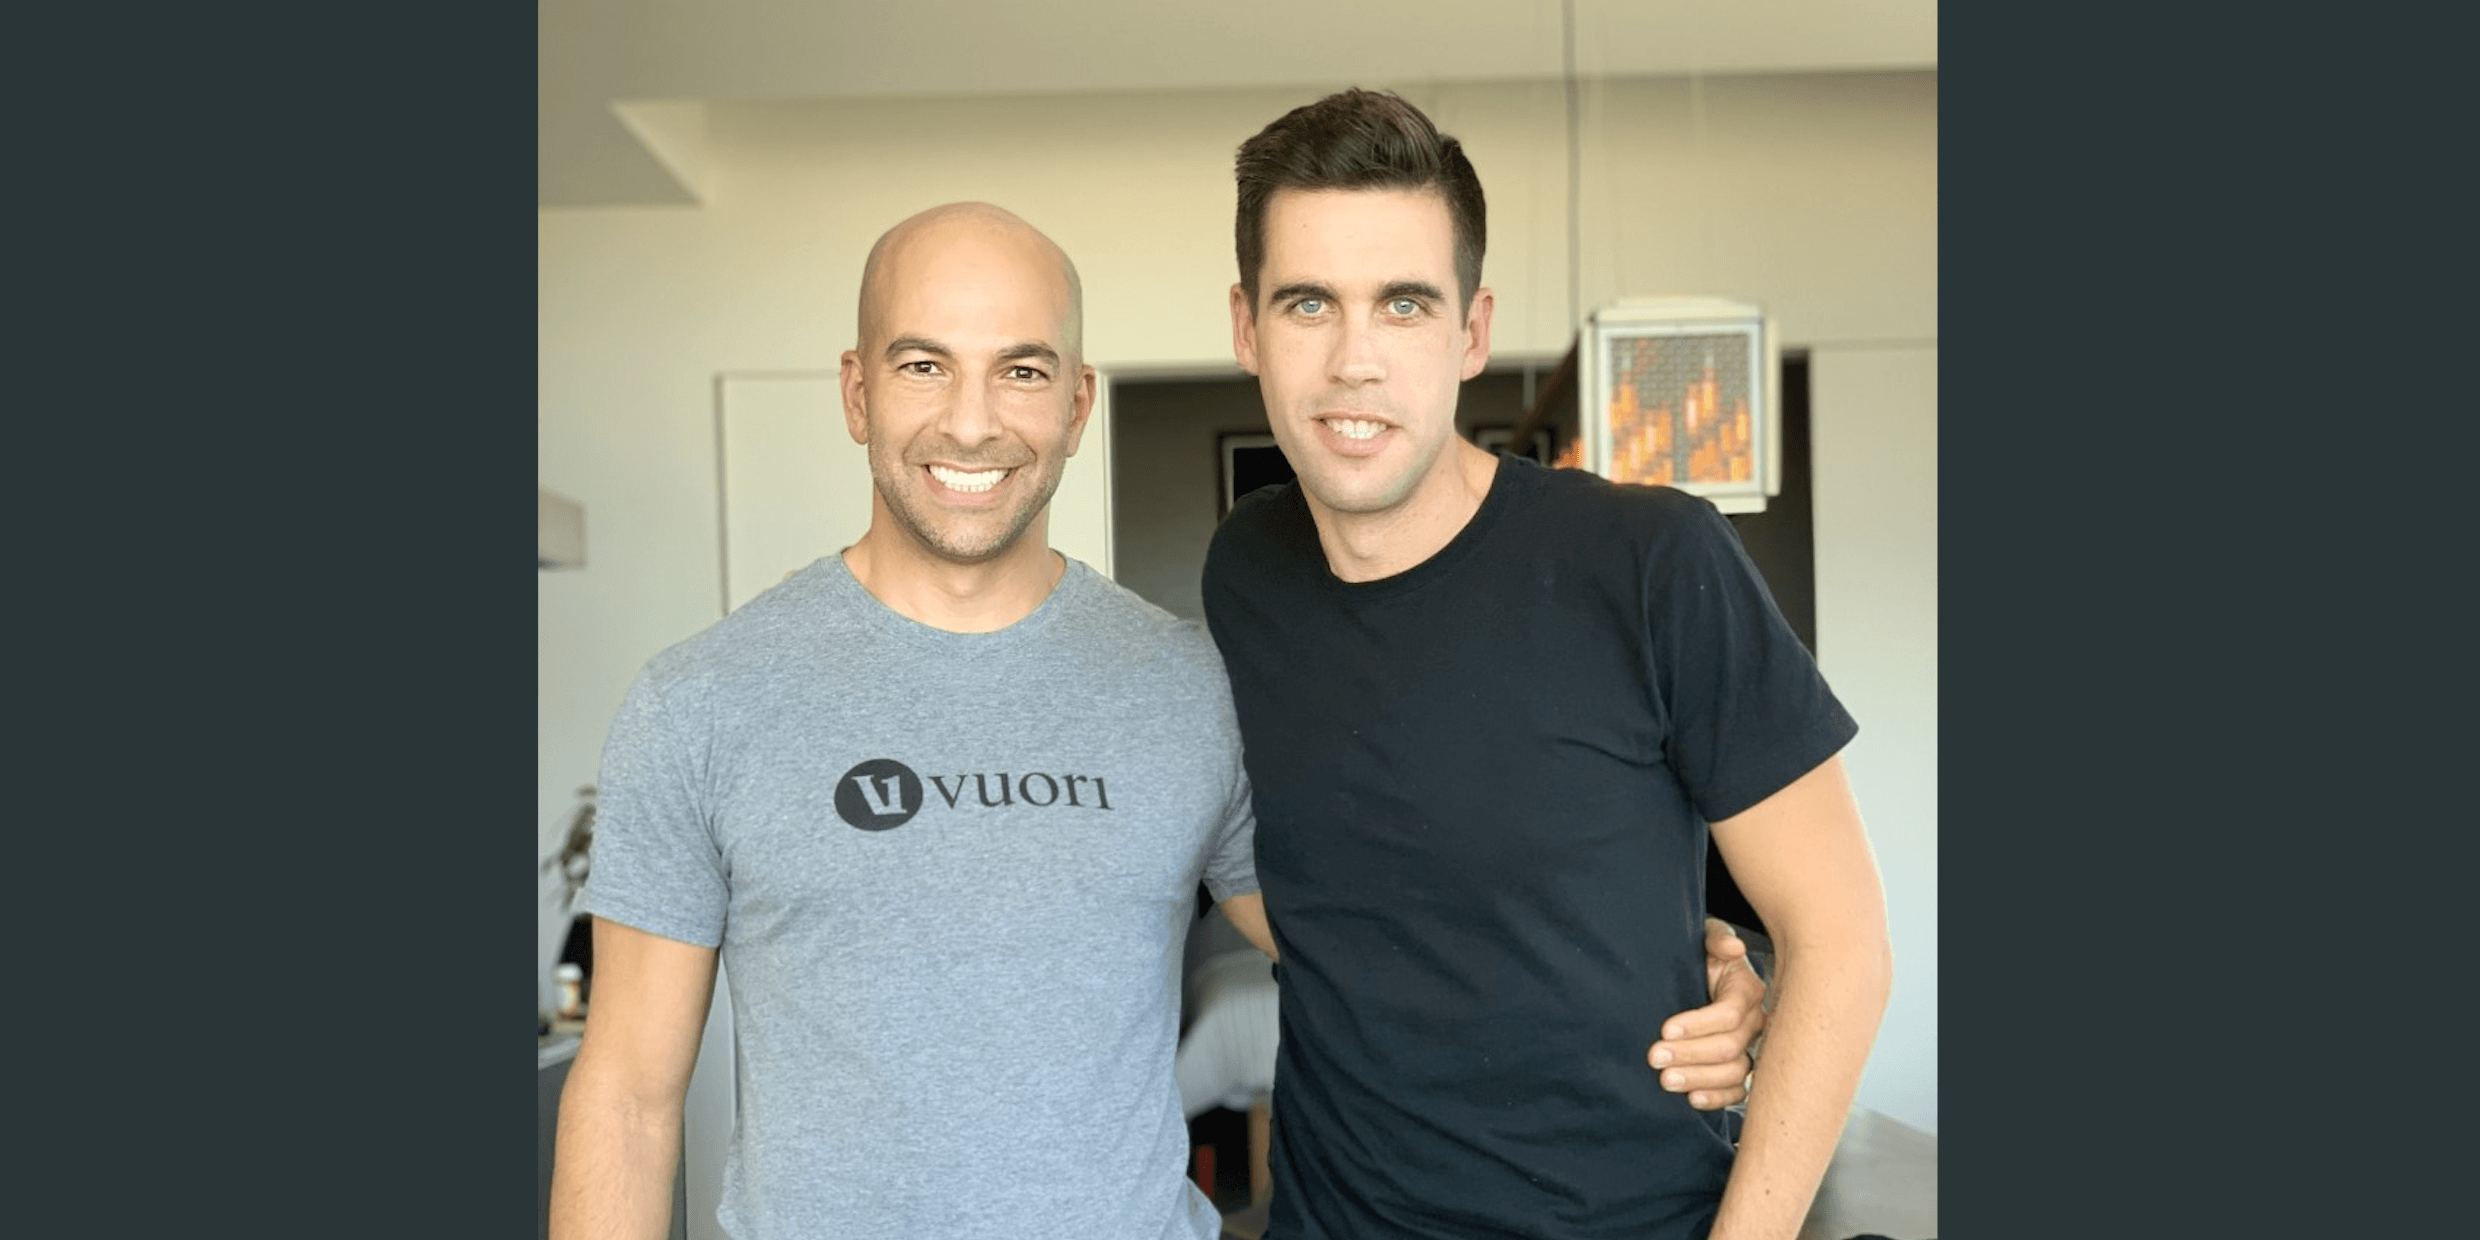 90 - Ryan Holiday: Stillness, stoicism, and suffering less - Peter